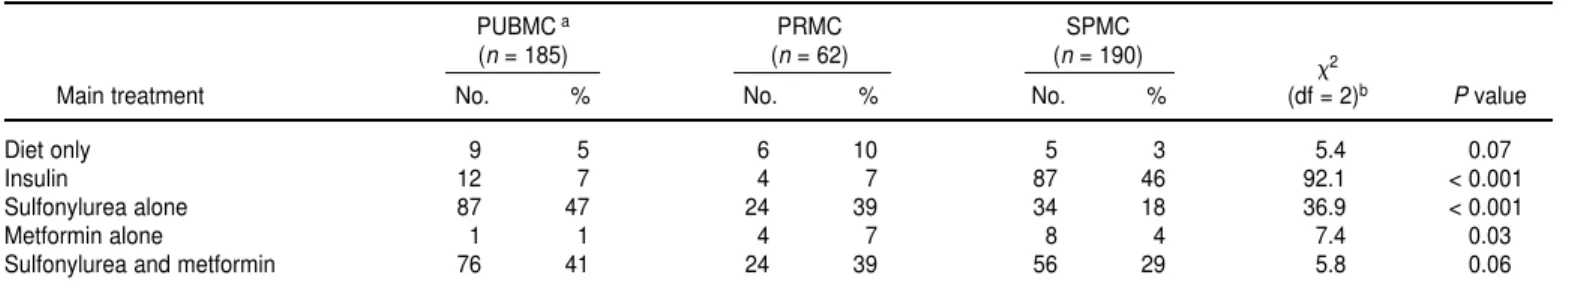 TABLE 2. Main treatments used with diabetic patients, by clinic type, Jamaica, 1995